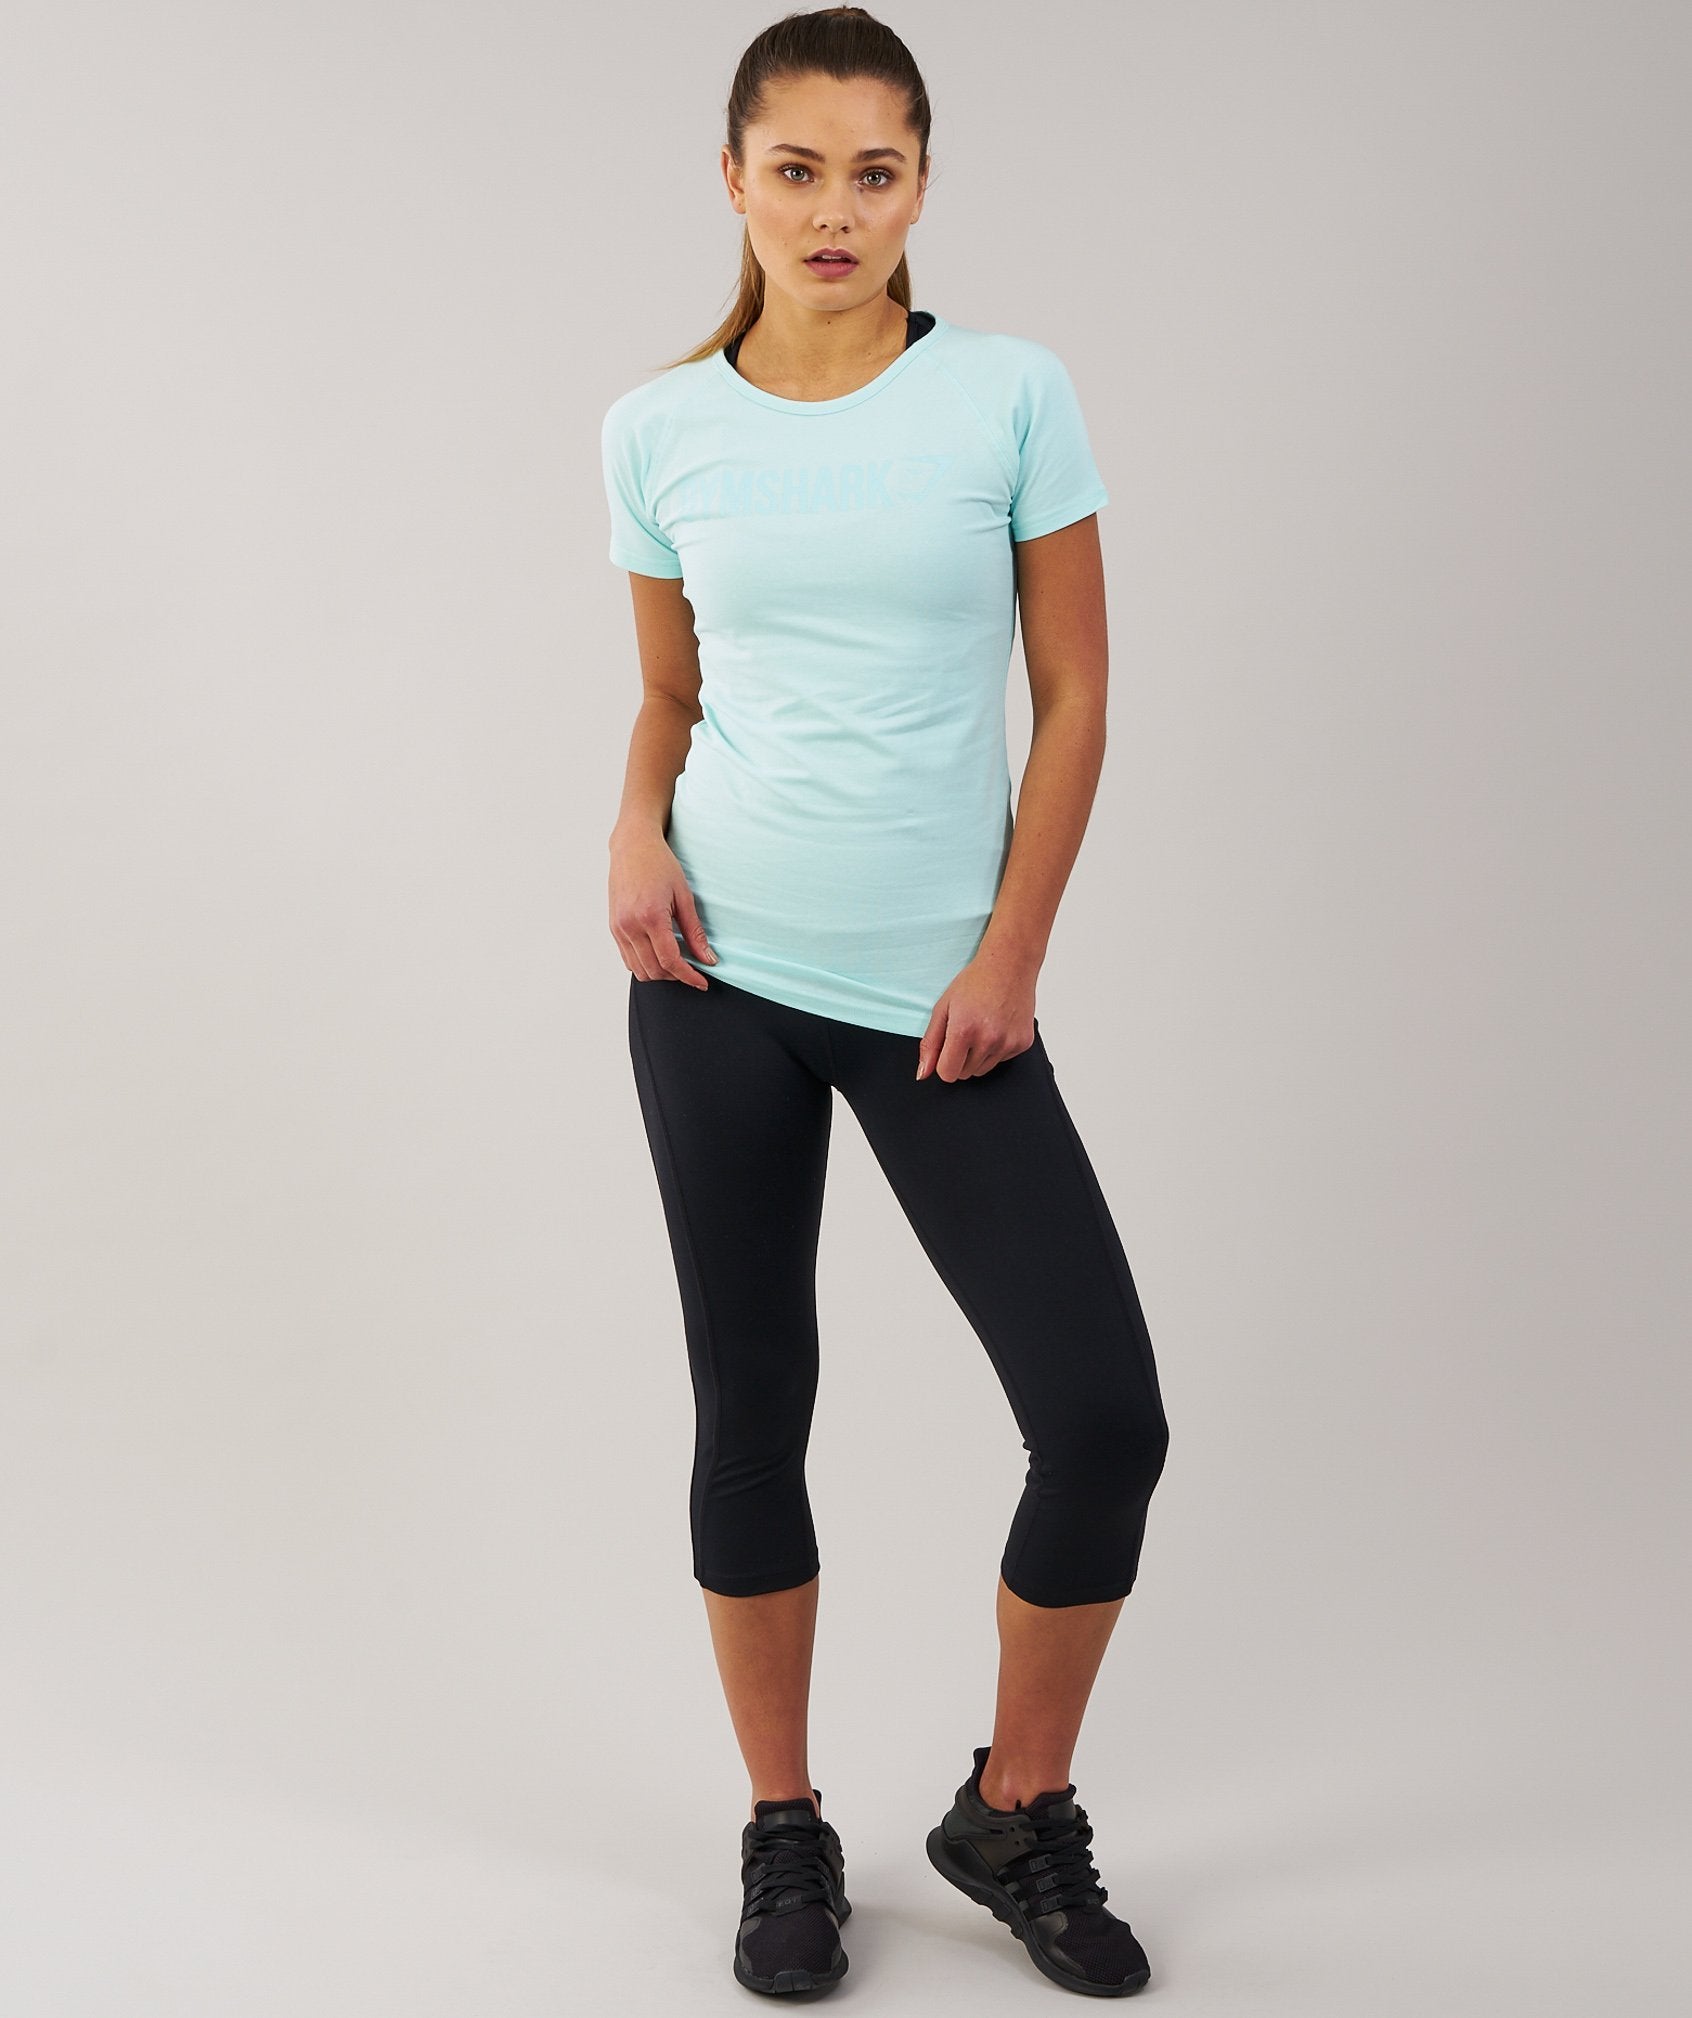 Women's Apollo T-Shirt in Pale Turquoise - view 3